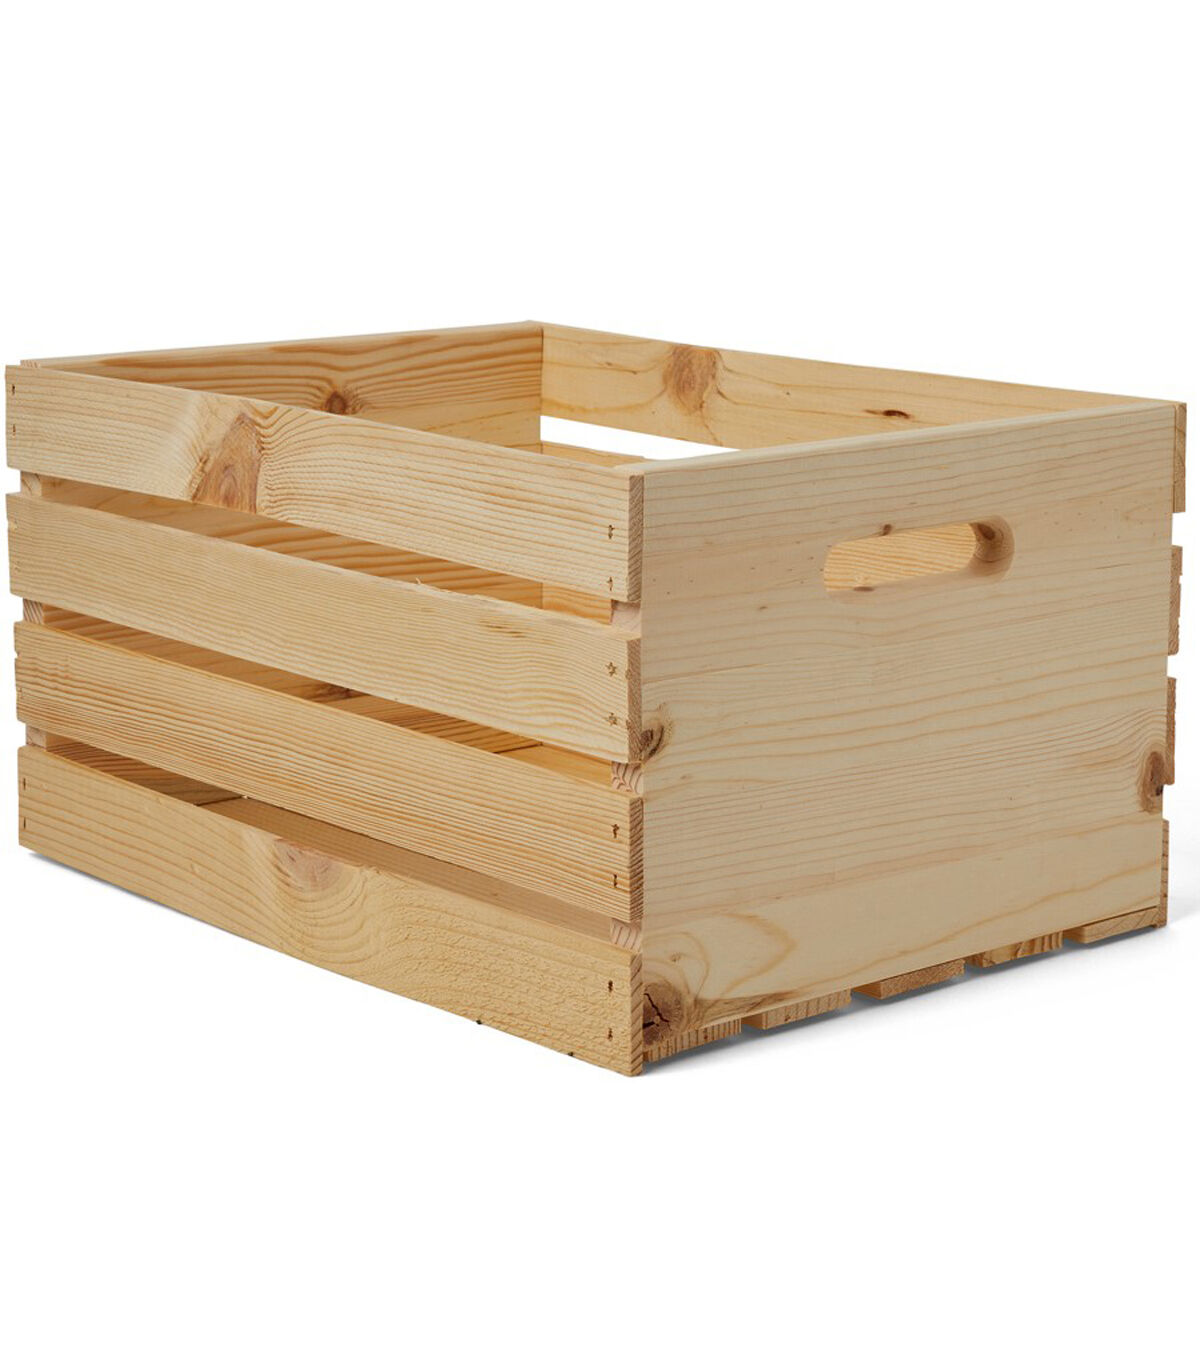 Custom Wooden Boxes Crates and Baskets